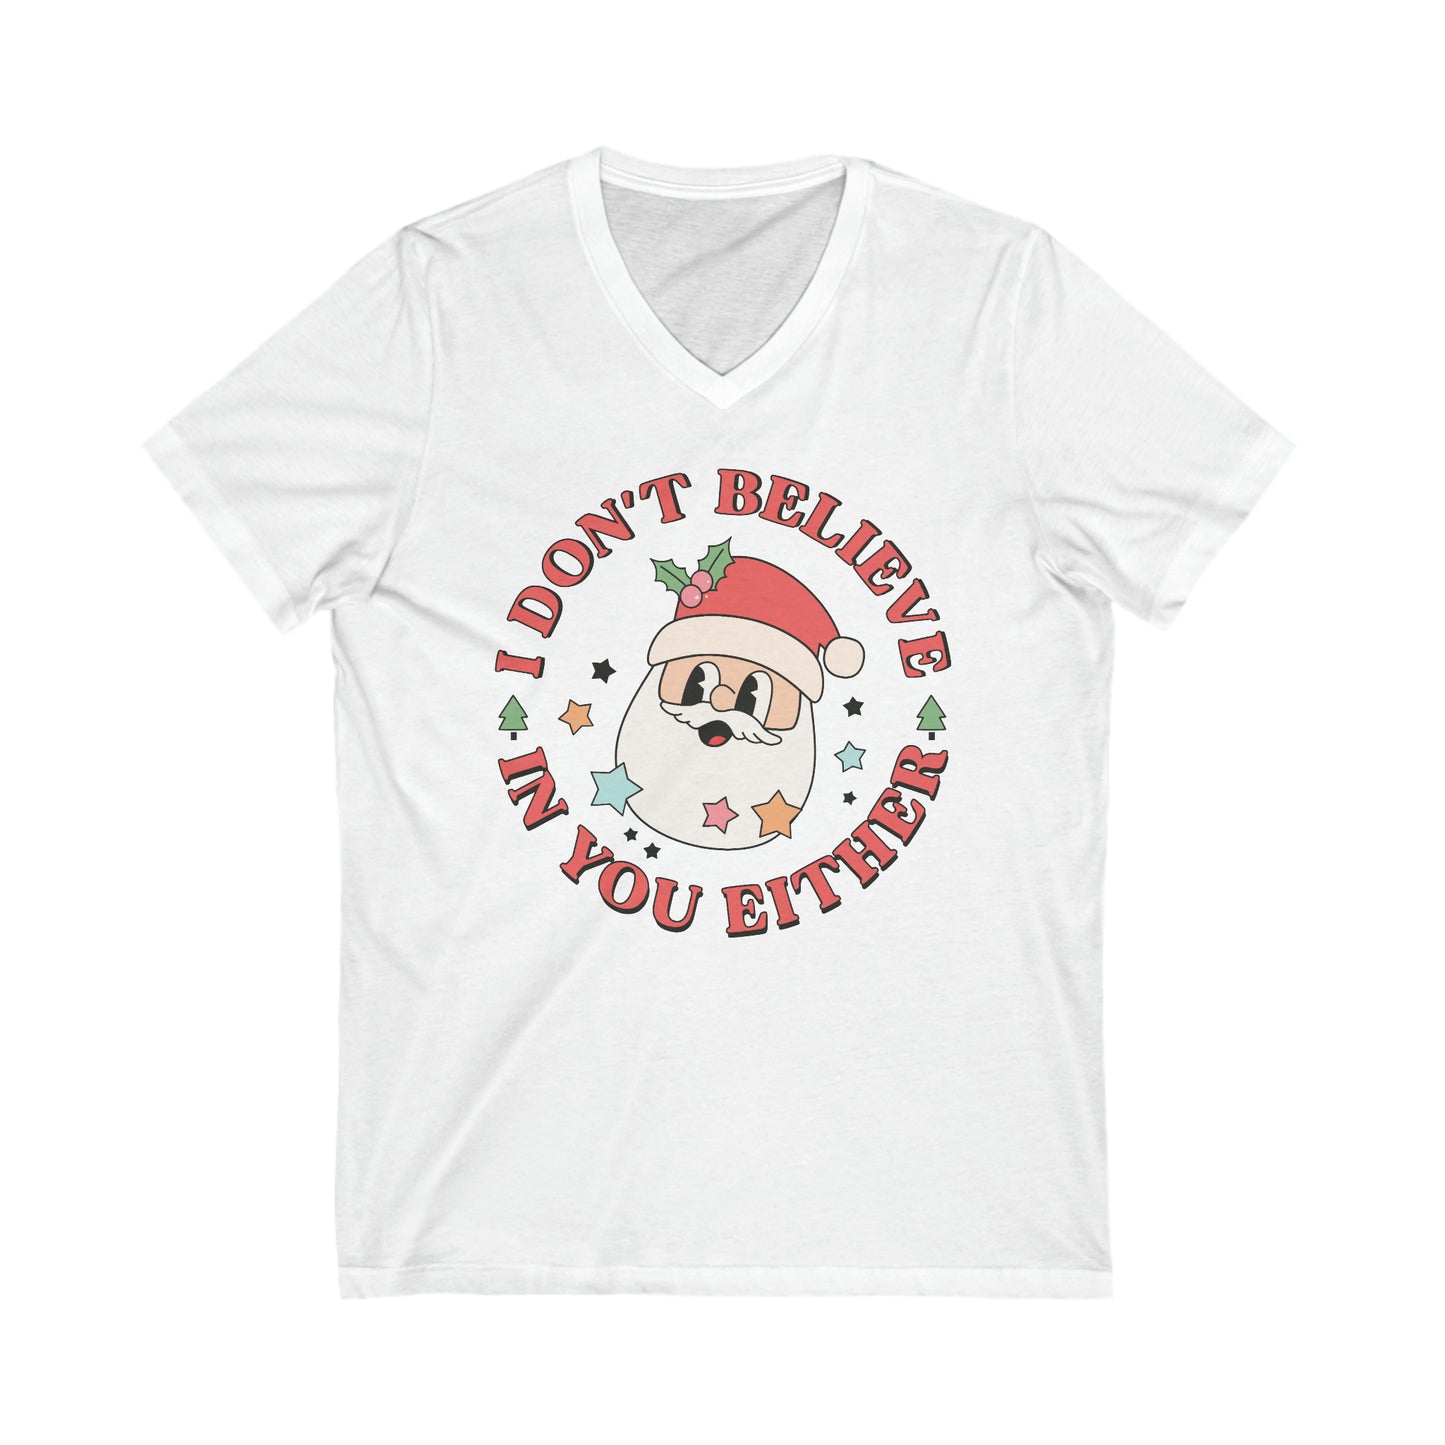 I Don't Believe In You Either: Unisex Jersey Short Sleeve V-Neck Tee